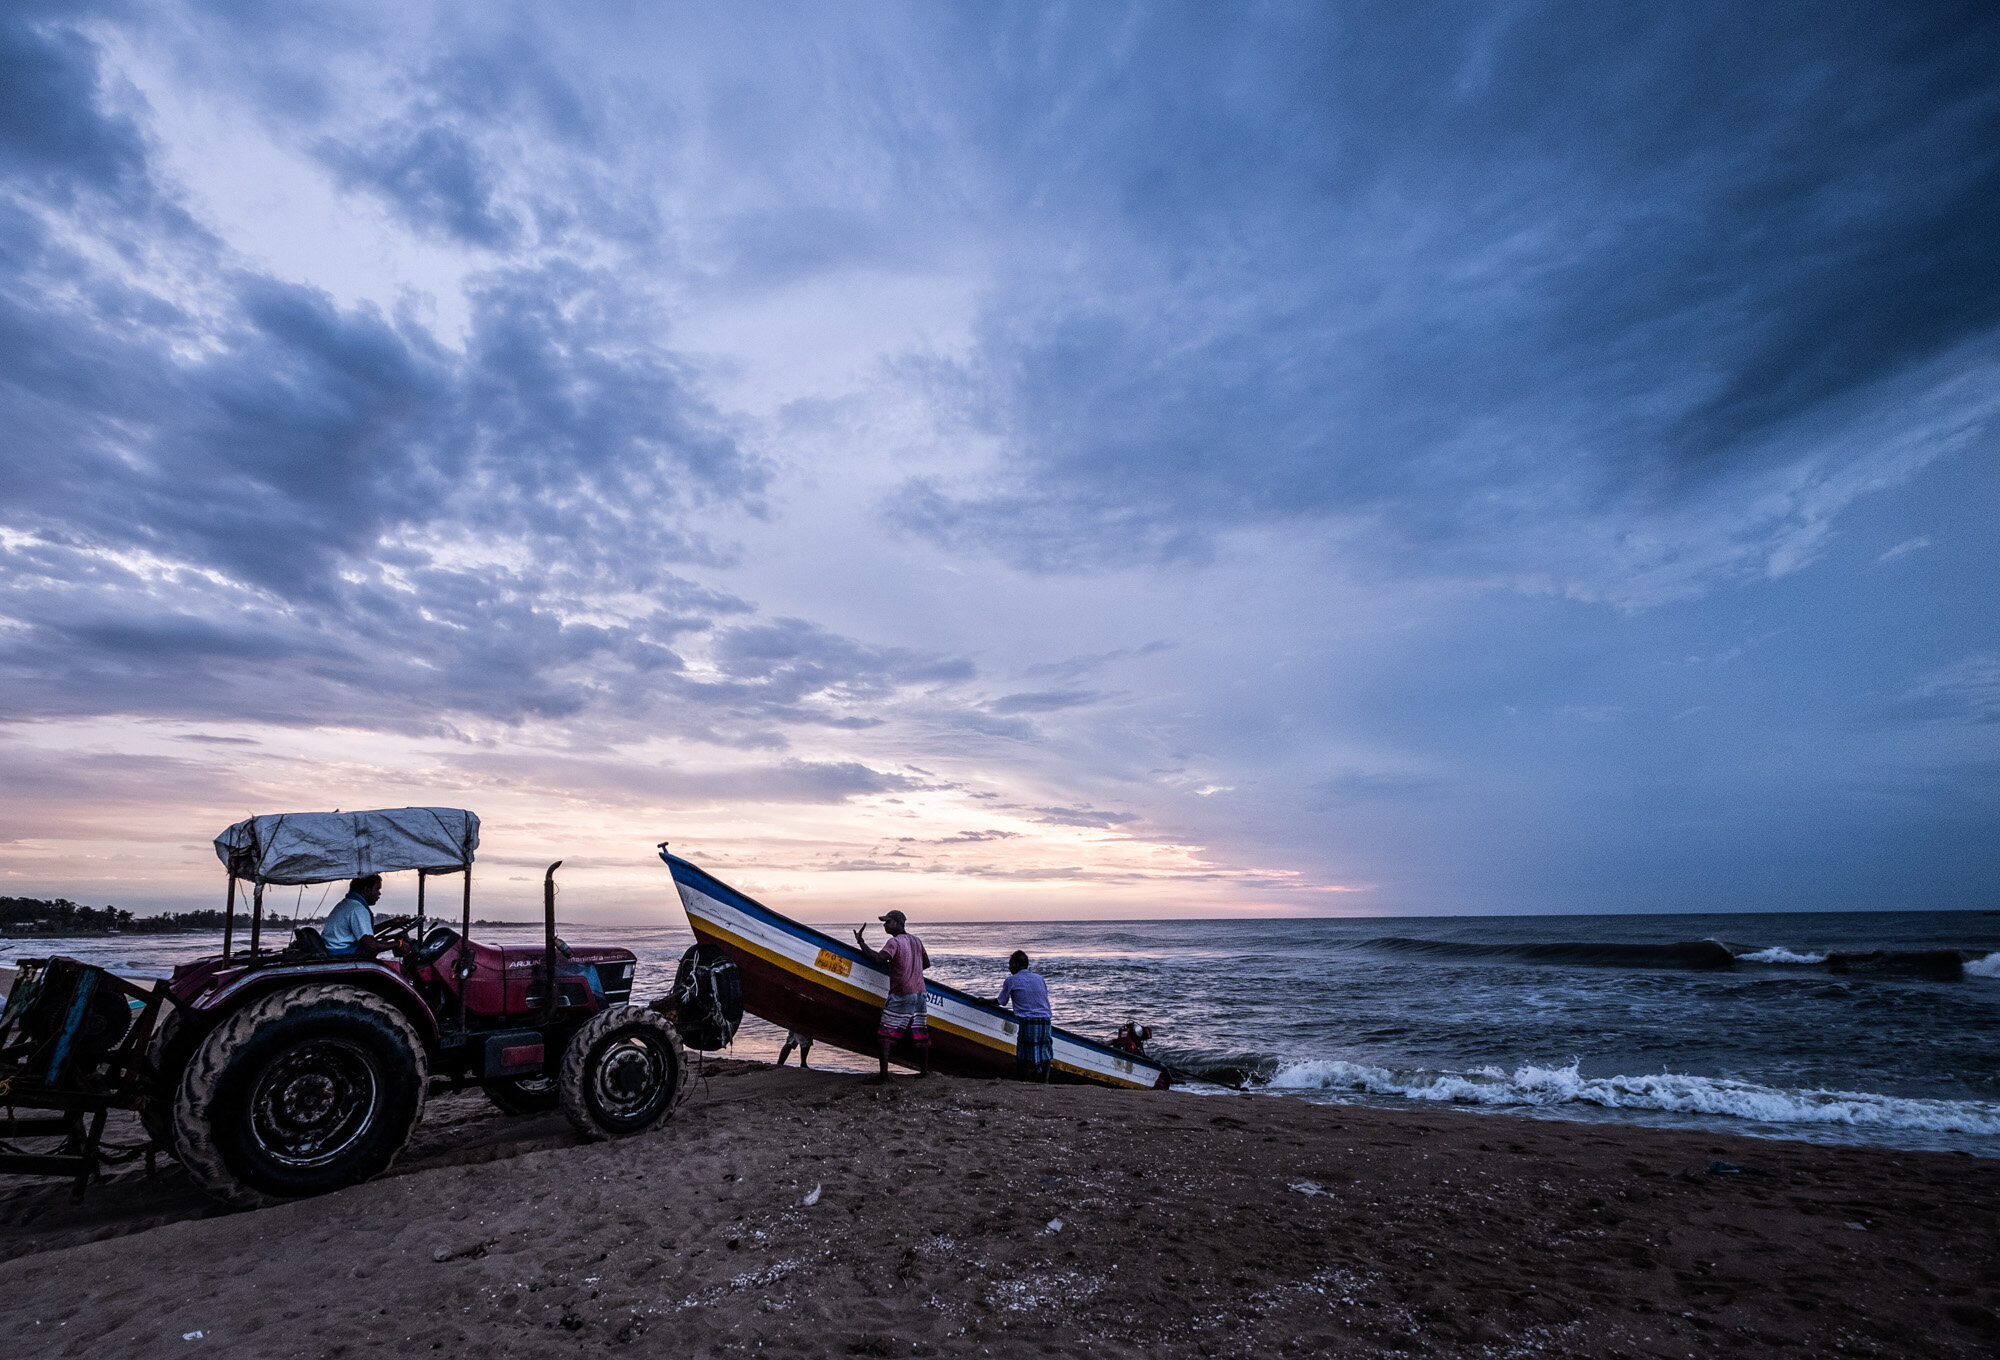  A tractor is utilized to push the boats into the surf in the morning 